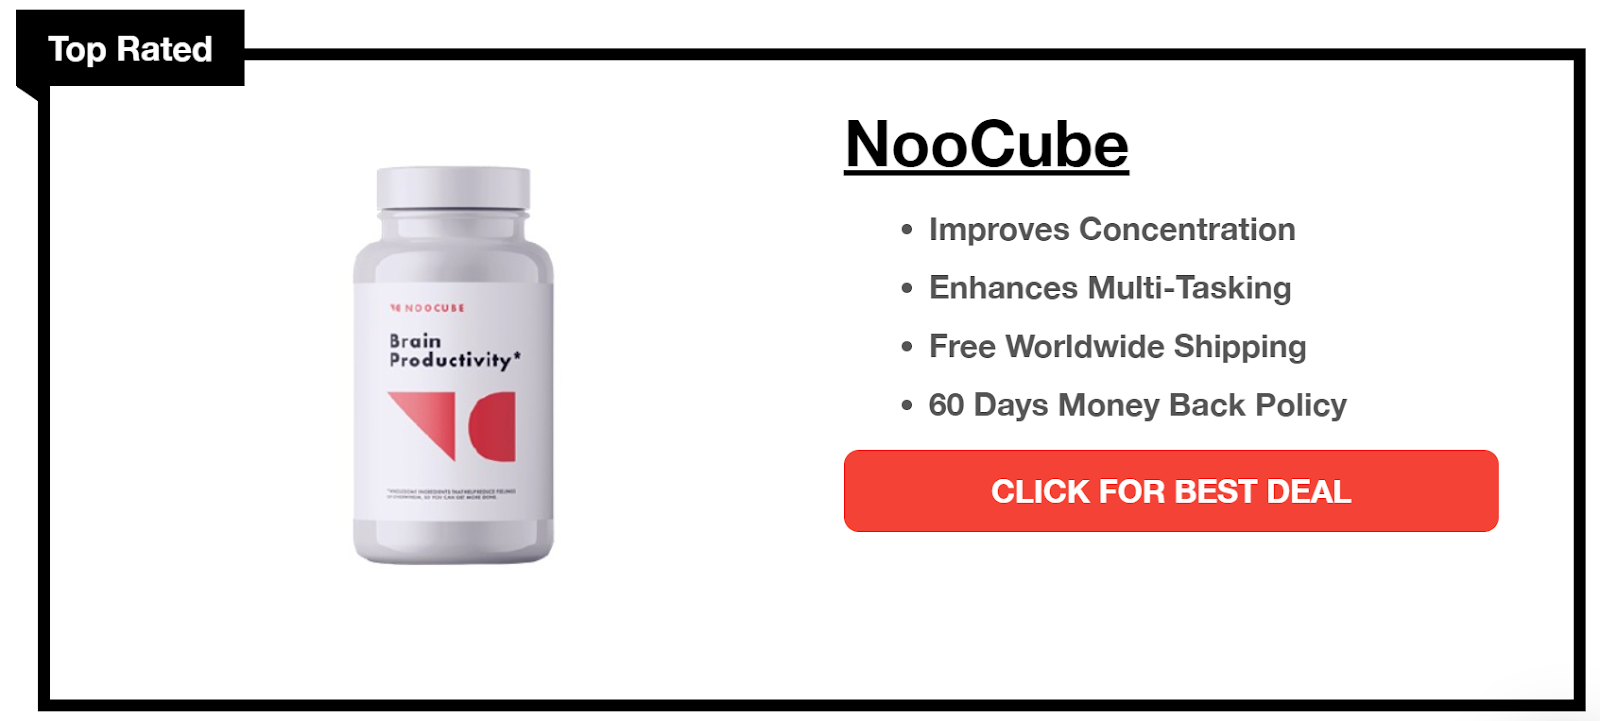 does riteaid sell noocube